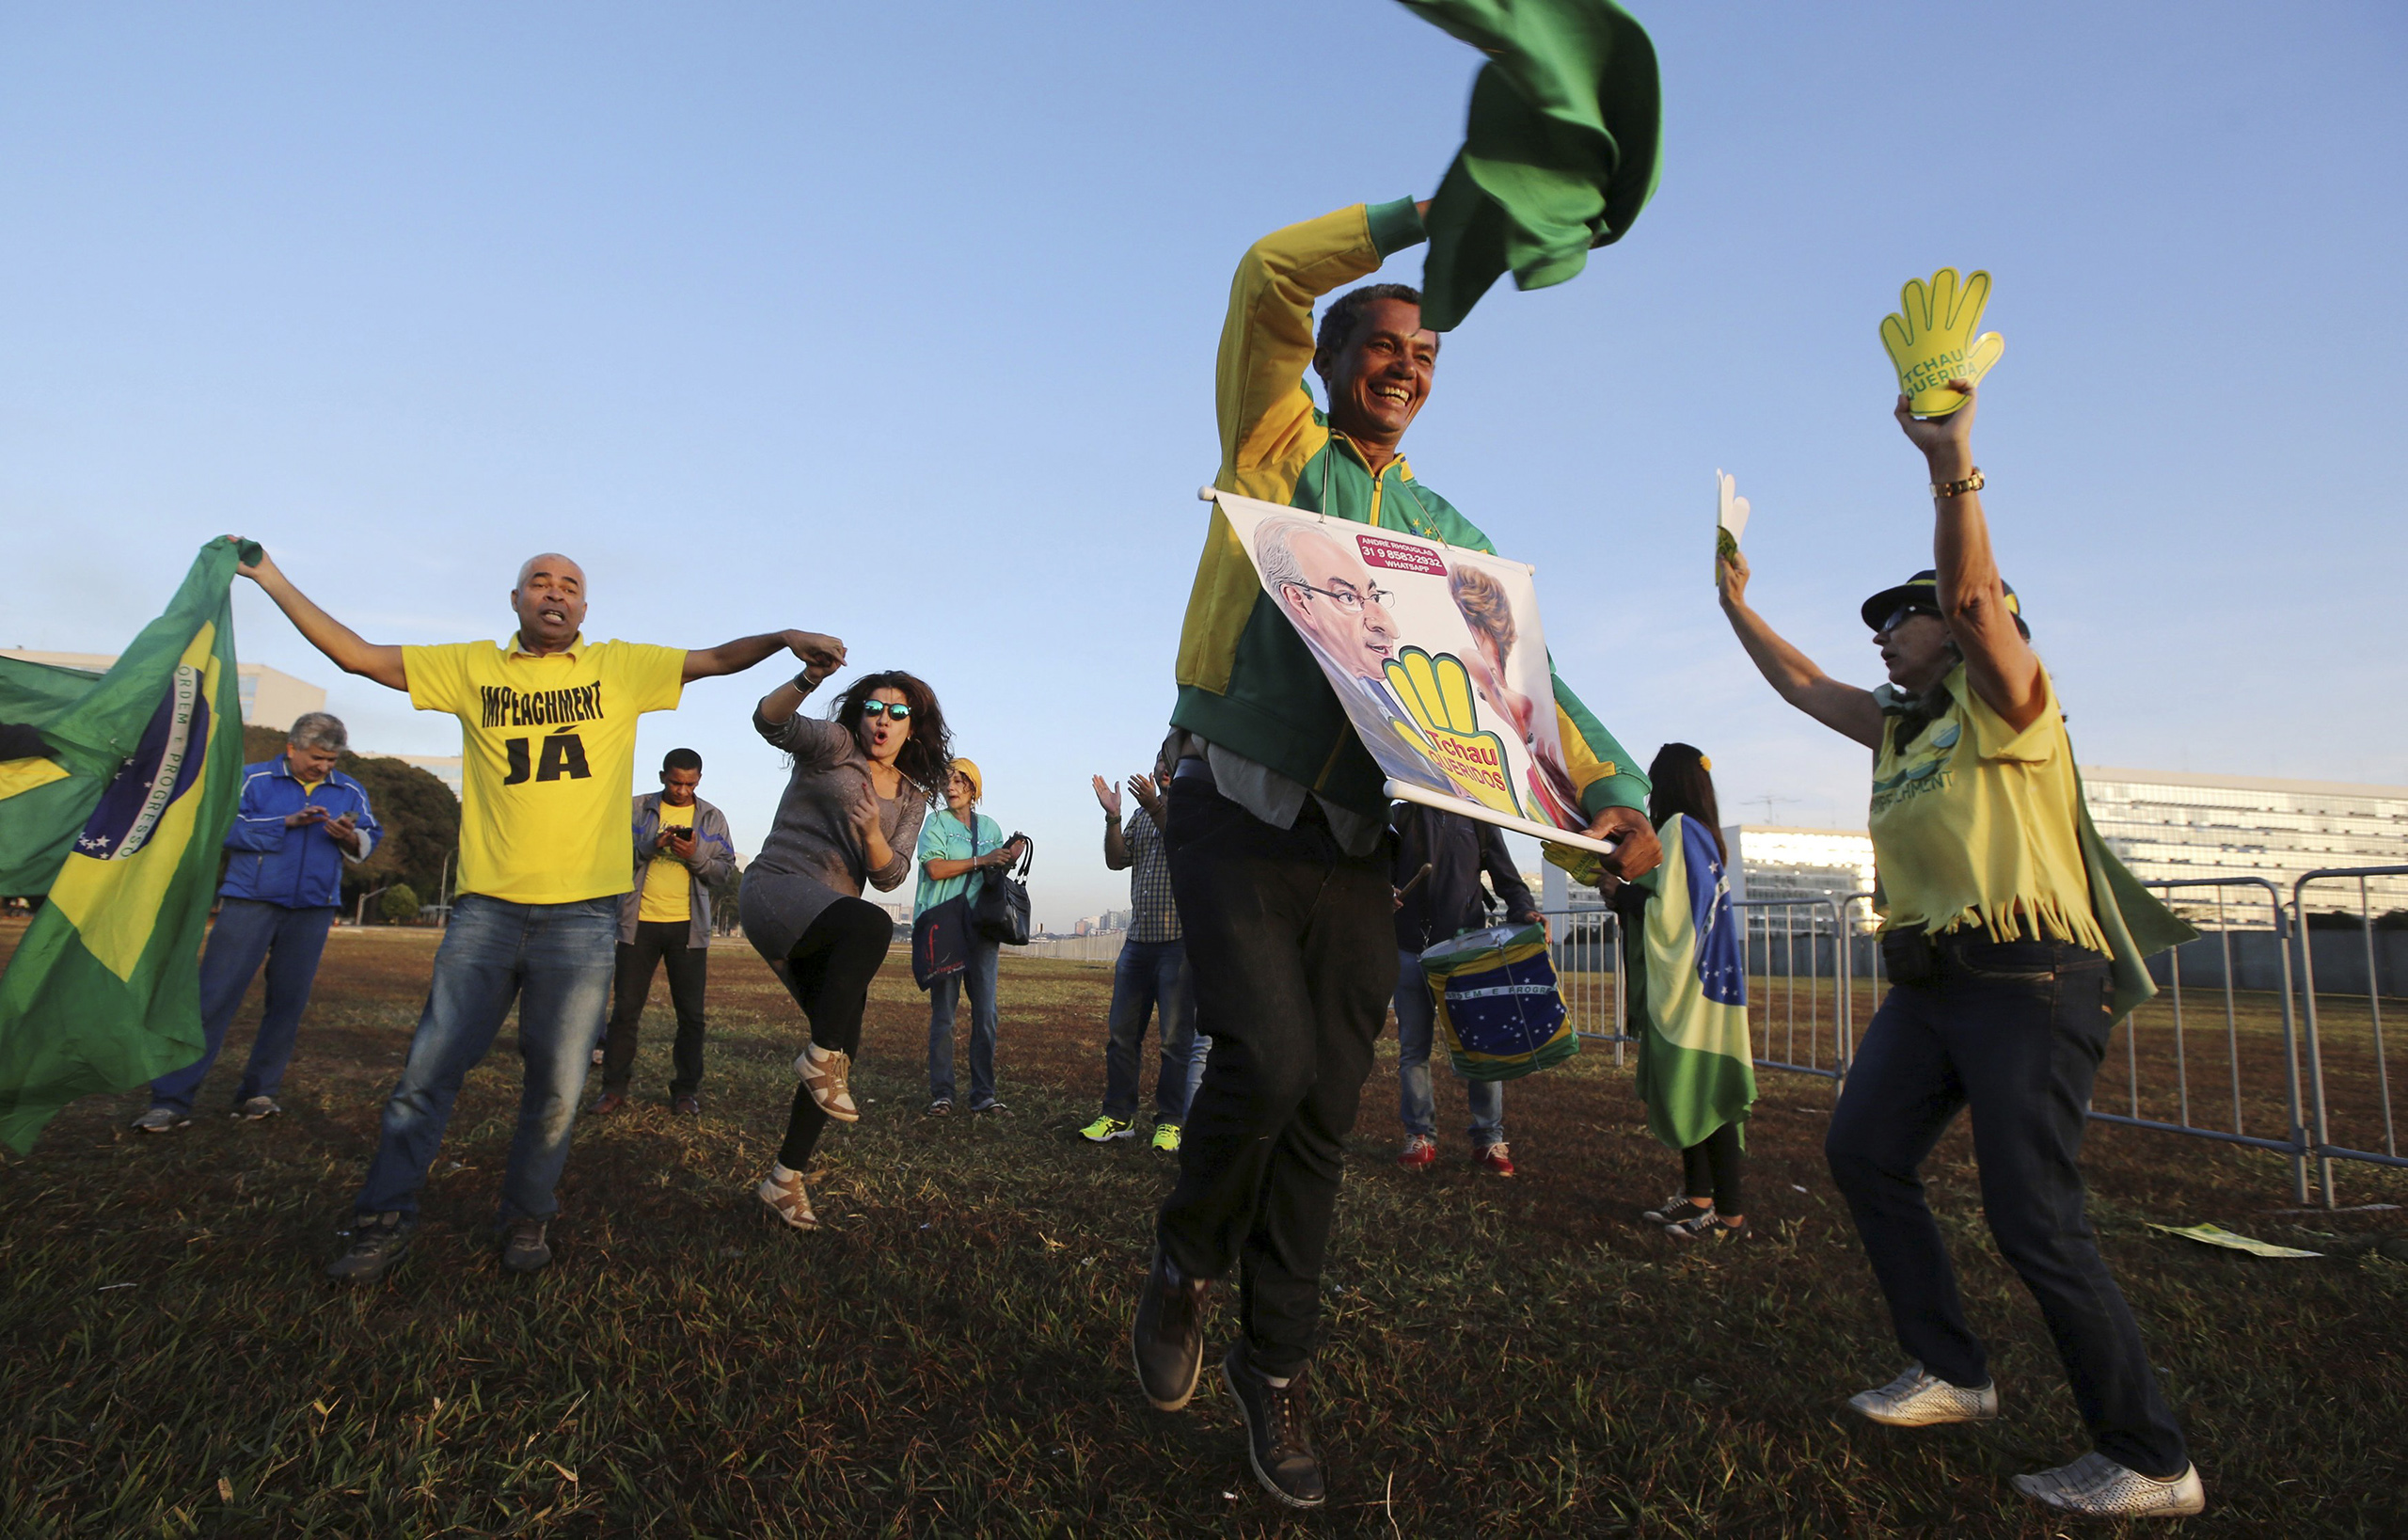 Demonstrators who support Brazil's President Dilma Rousseff's impeachment react in Brasilia, Brazil, May 12, 2016. (Paulo Whitaker—Reuters)